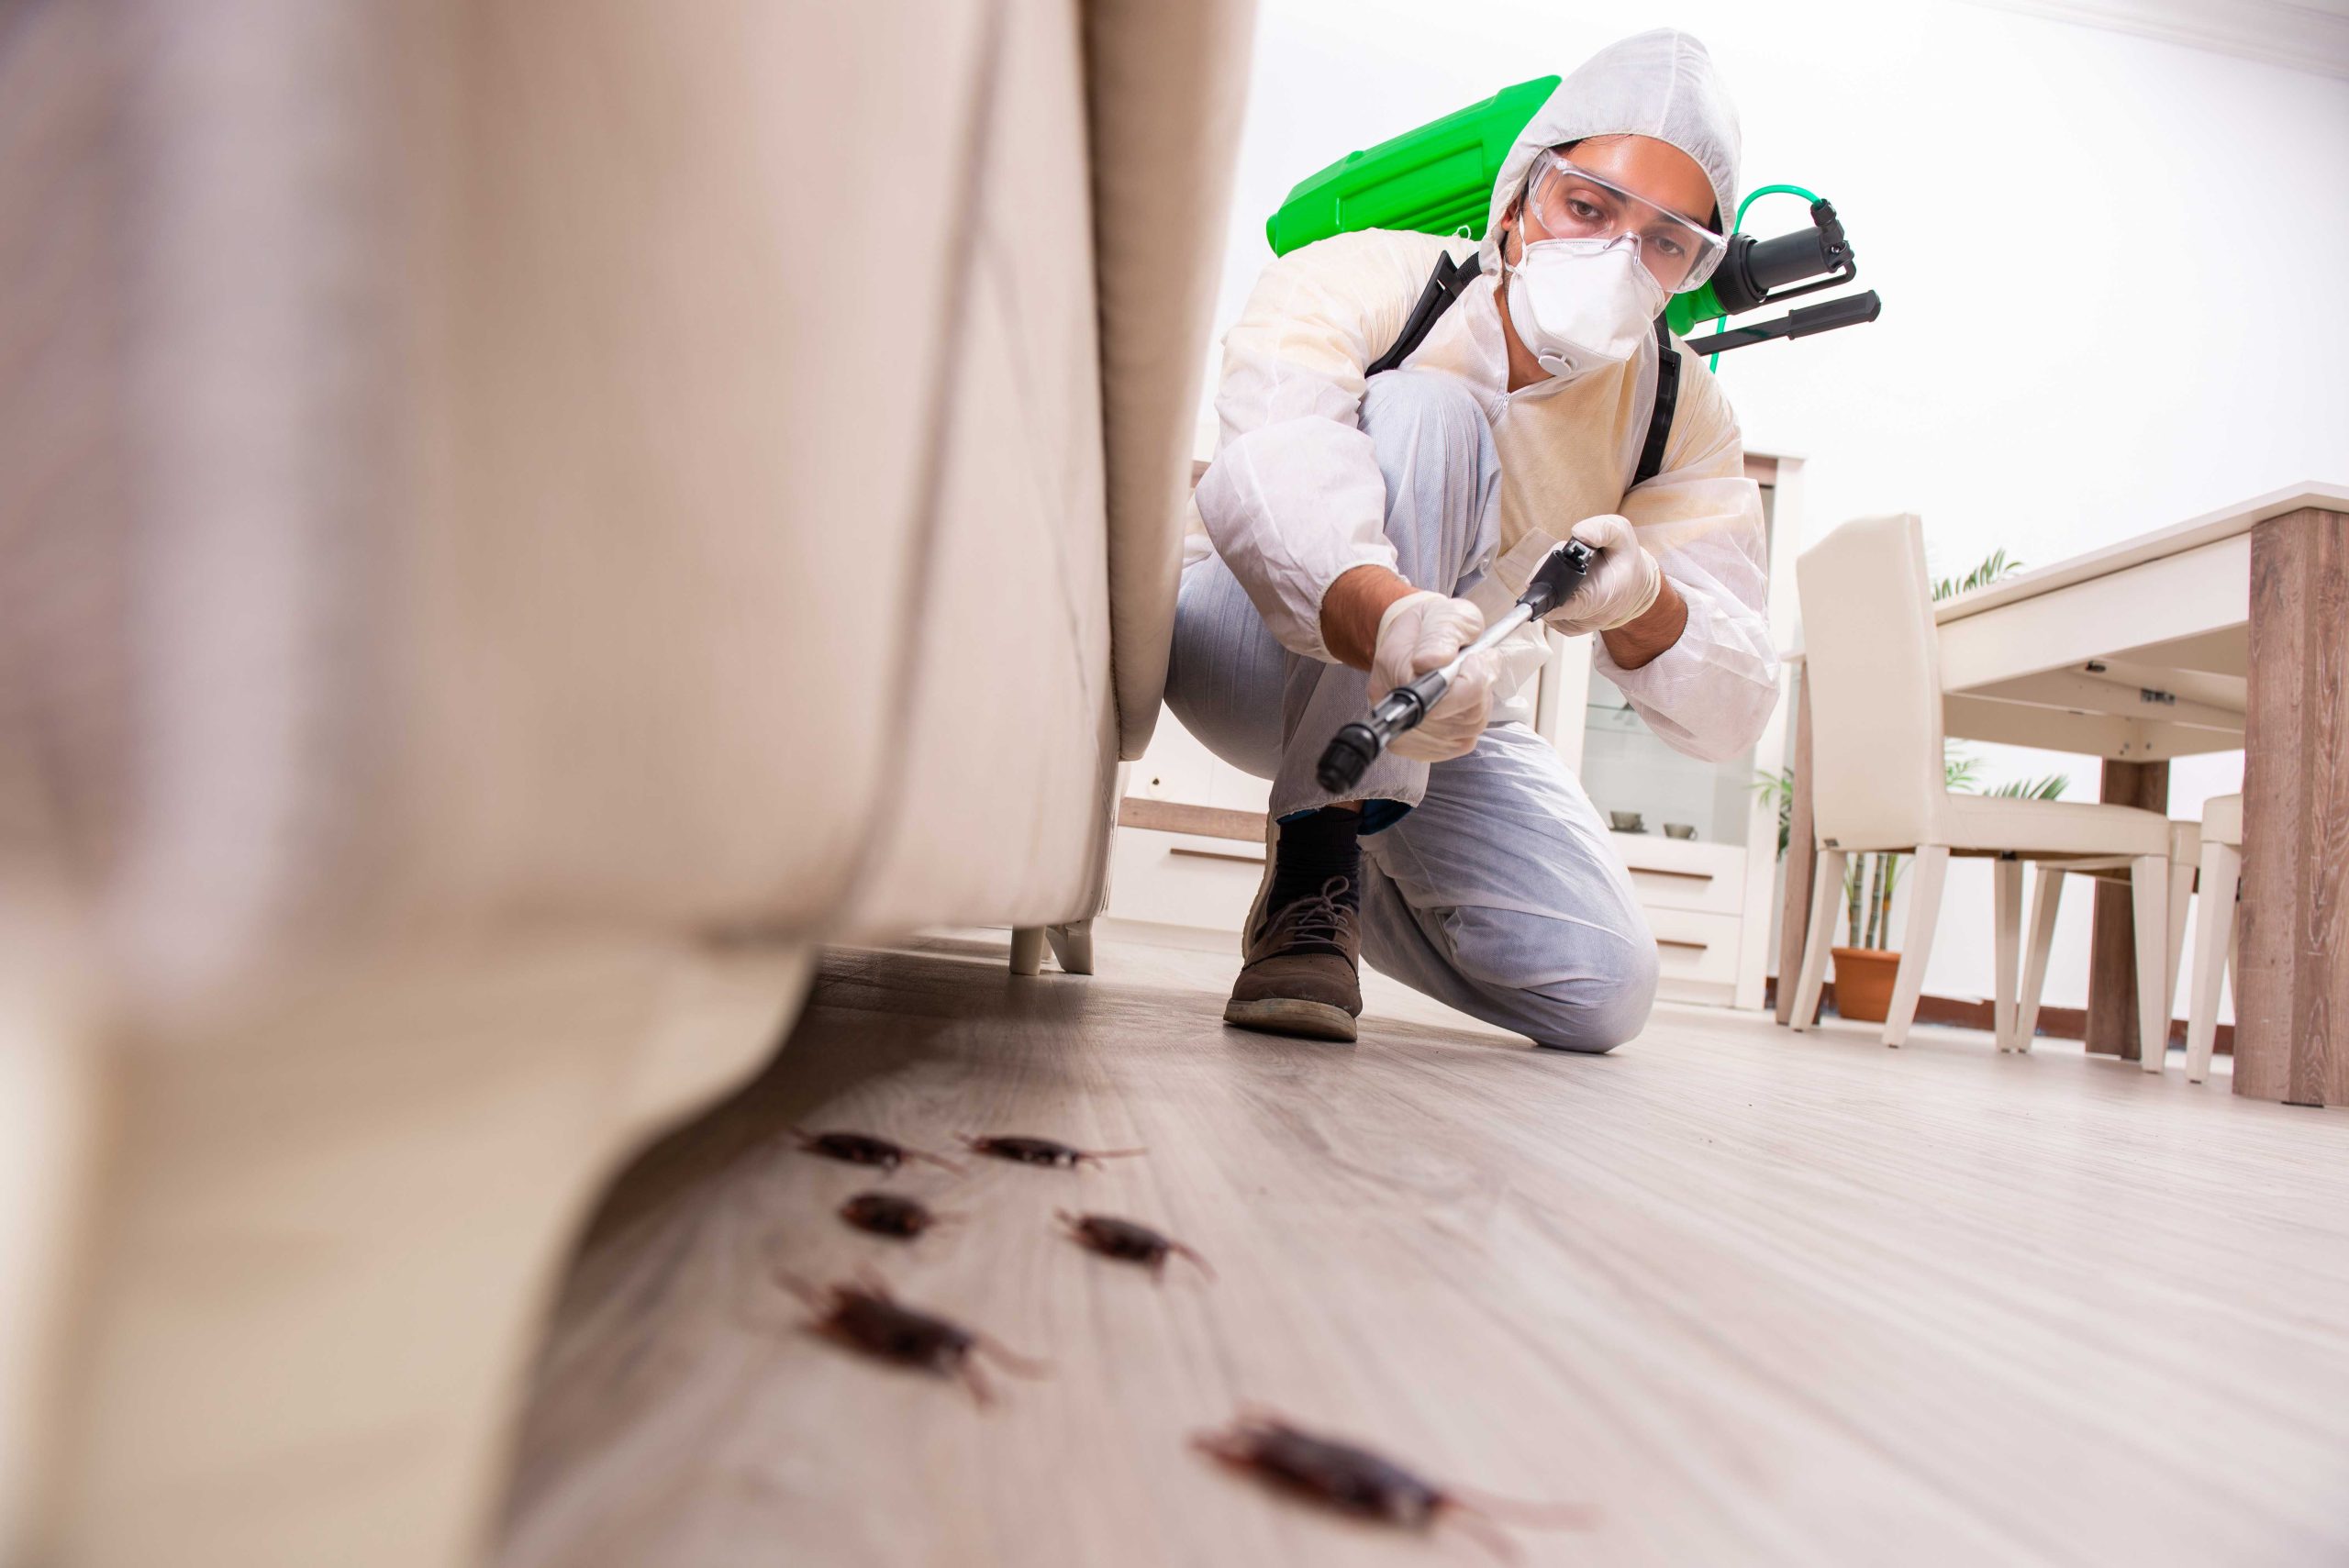 Pest-Control experts in Peachtree Corners specializing in prevention and eradication of various pests. Don't let pests damage your property and endanger your health.